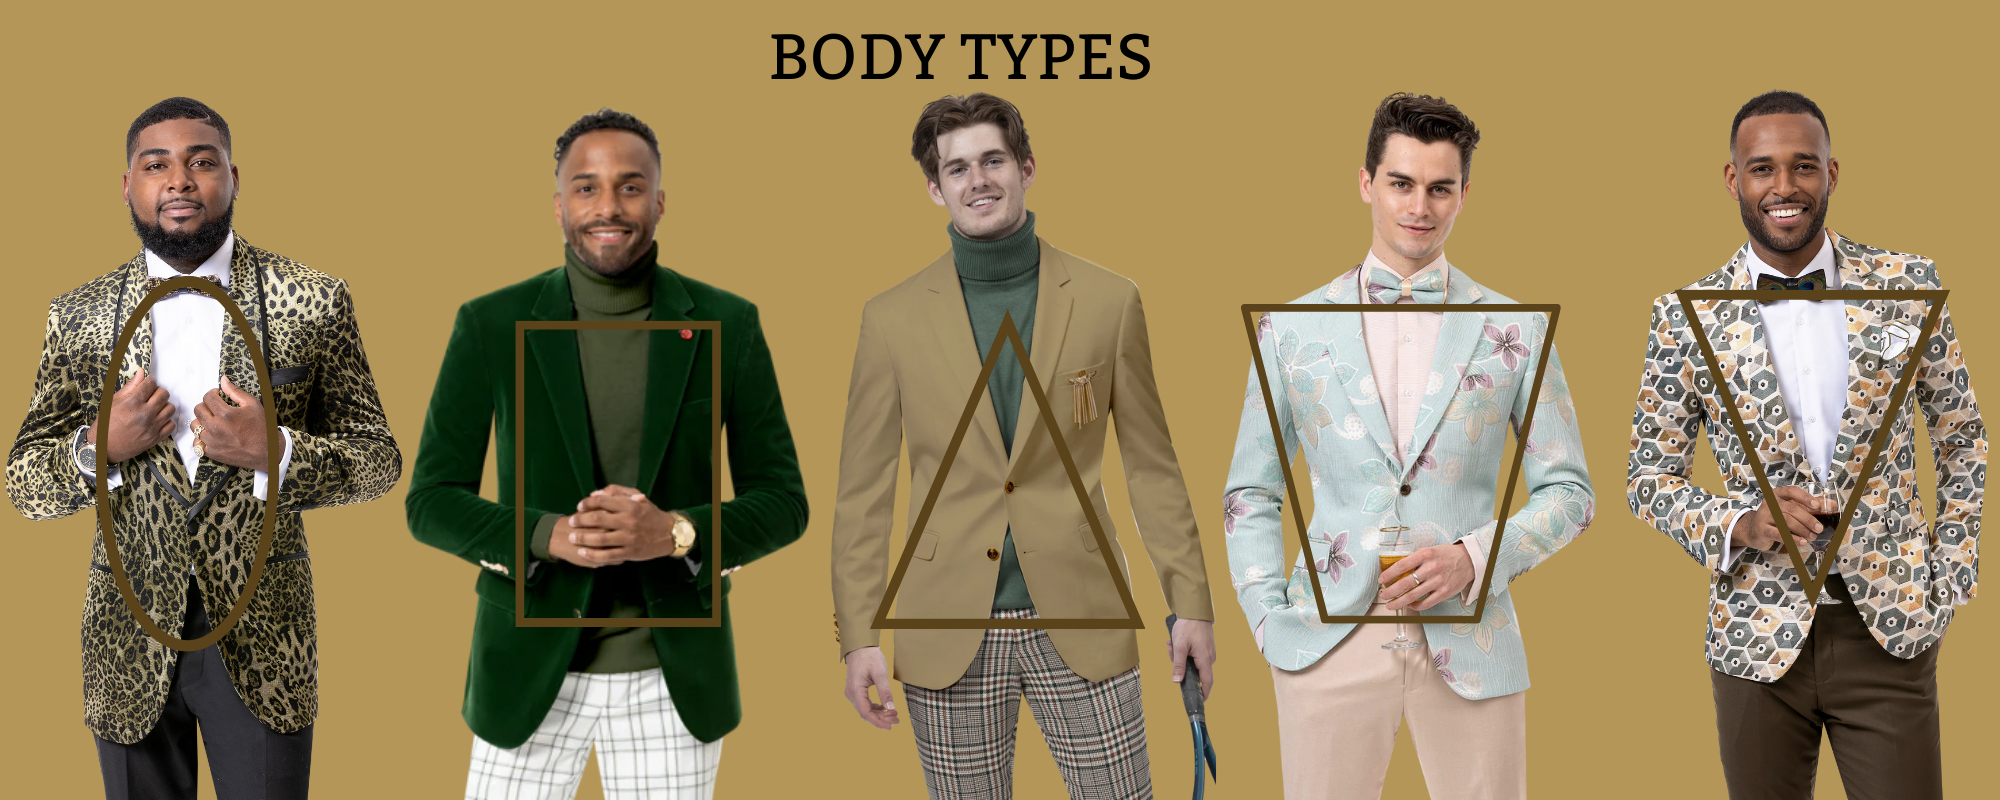 Five men are shown wearing different outfits, each with a geometric shape over their bodies to represent different body types. The background is a solid tan color with the title 'Body Types' at the top.